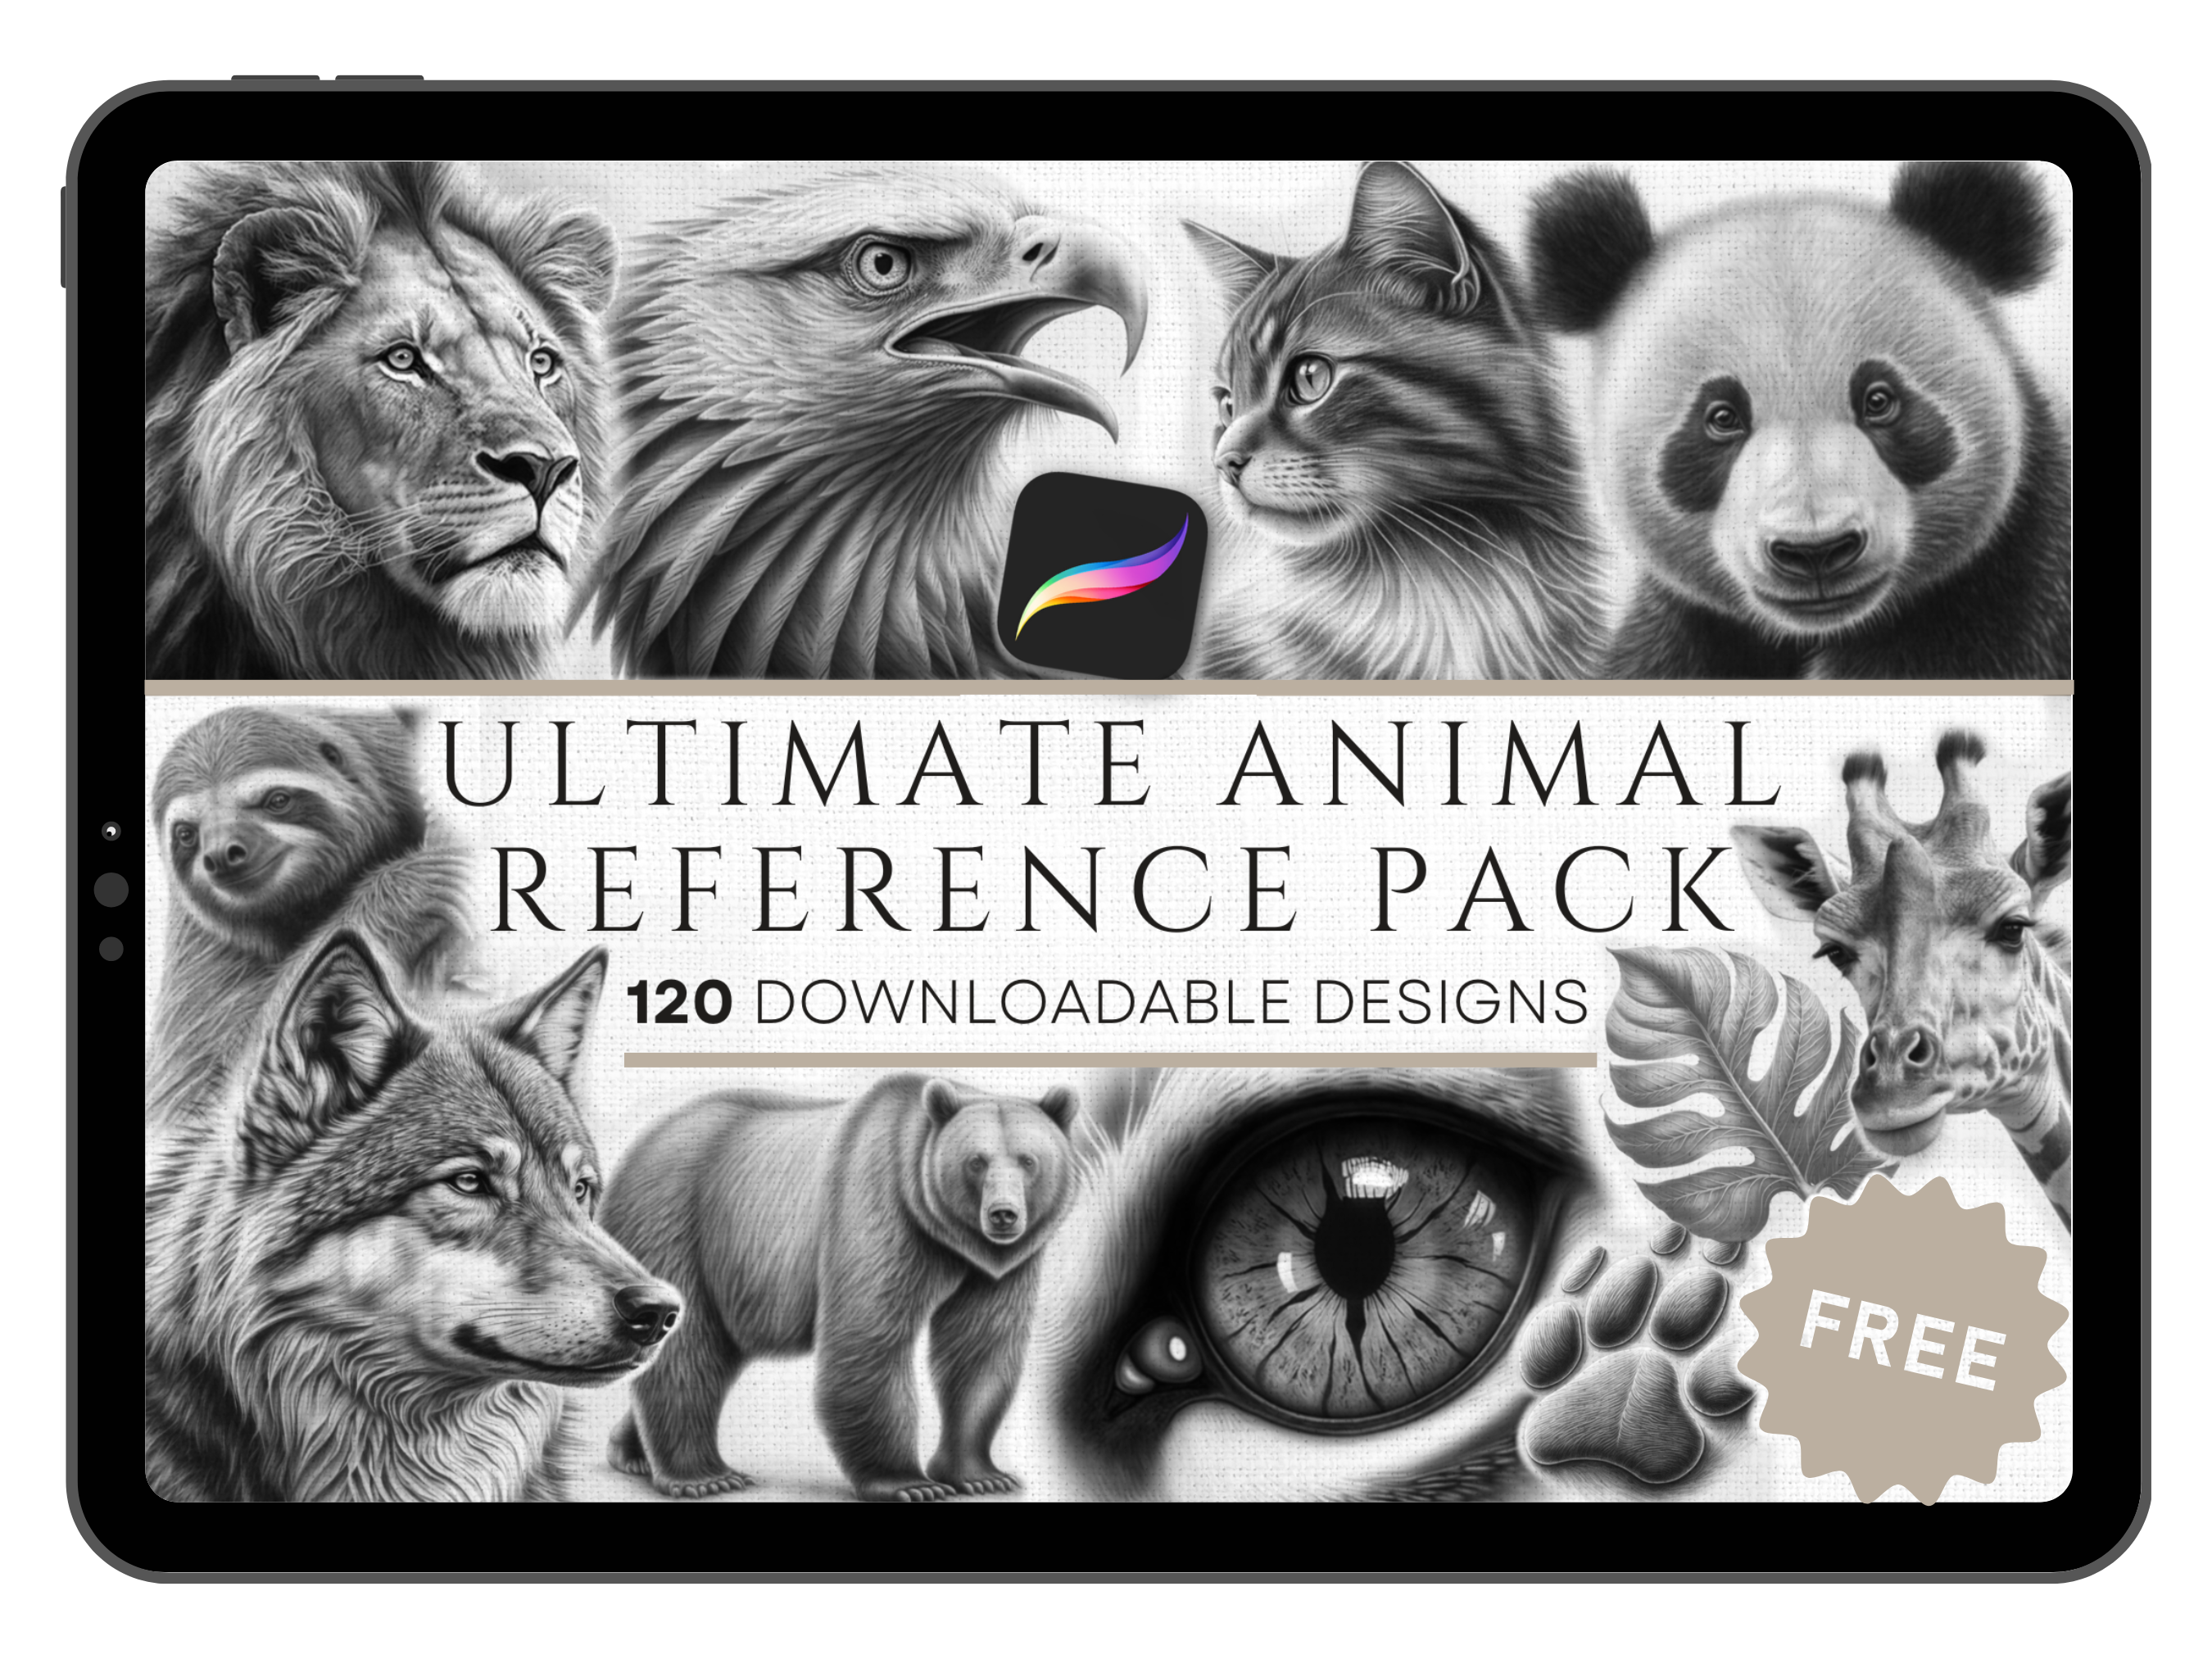 Explore the World of Creativity with Our FREE Animal Reference Design Pack! 120+ Designs included